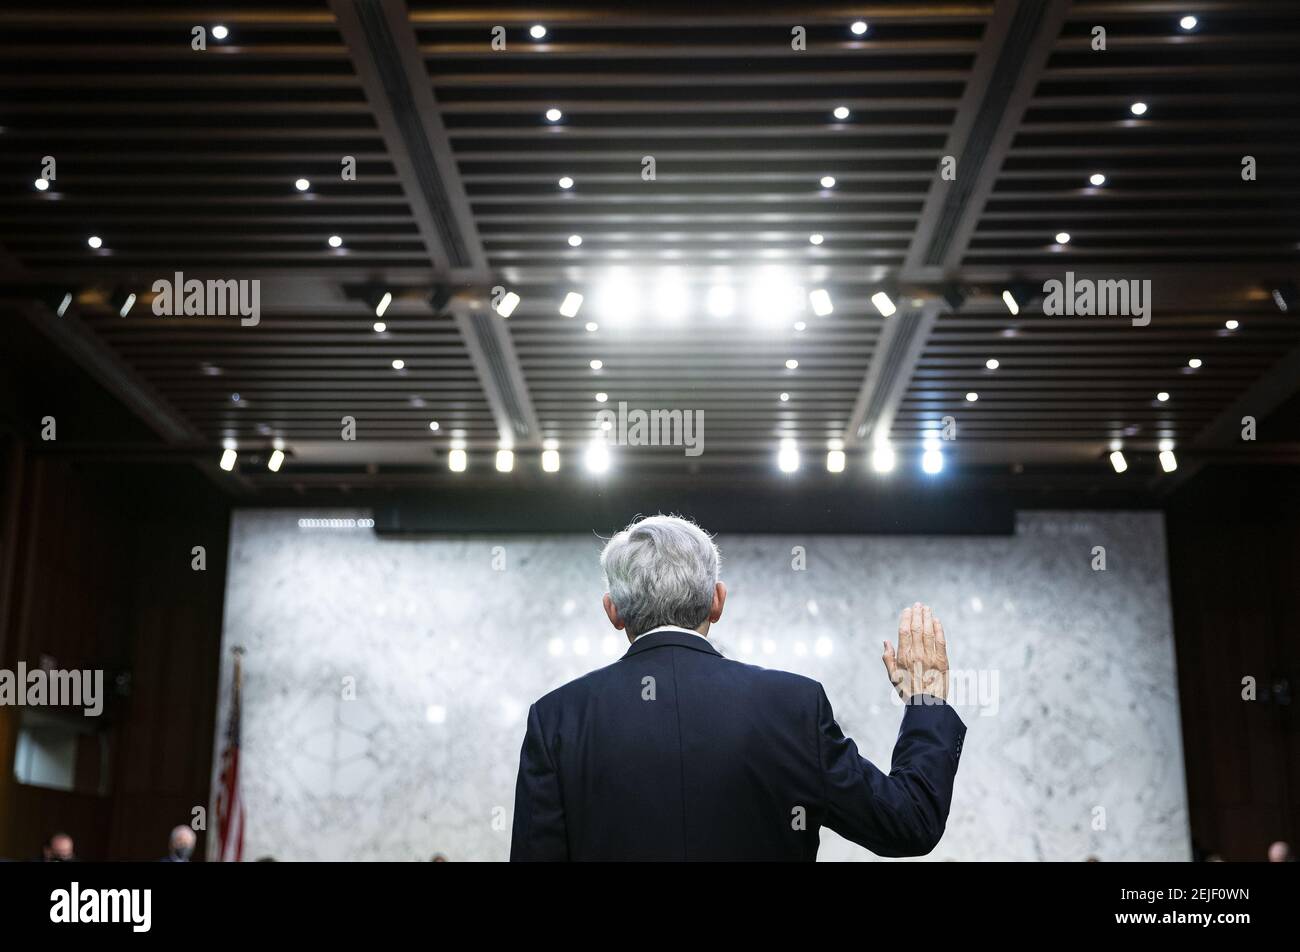 Washington, United States. 22nd Feb, 2021. Attorney General nominee Merrick Garland is sworn-in during his confirmation hearing on Capitol Hill in Washington, DC on February 22, 2021. Garland previously served at the Chief Judge for the U.S. Court of Appeals for the District of Columbia Circuit. Pool Photo by Al Drago/UPI Credit: UPI/Alamy Live News Stock Photo